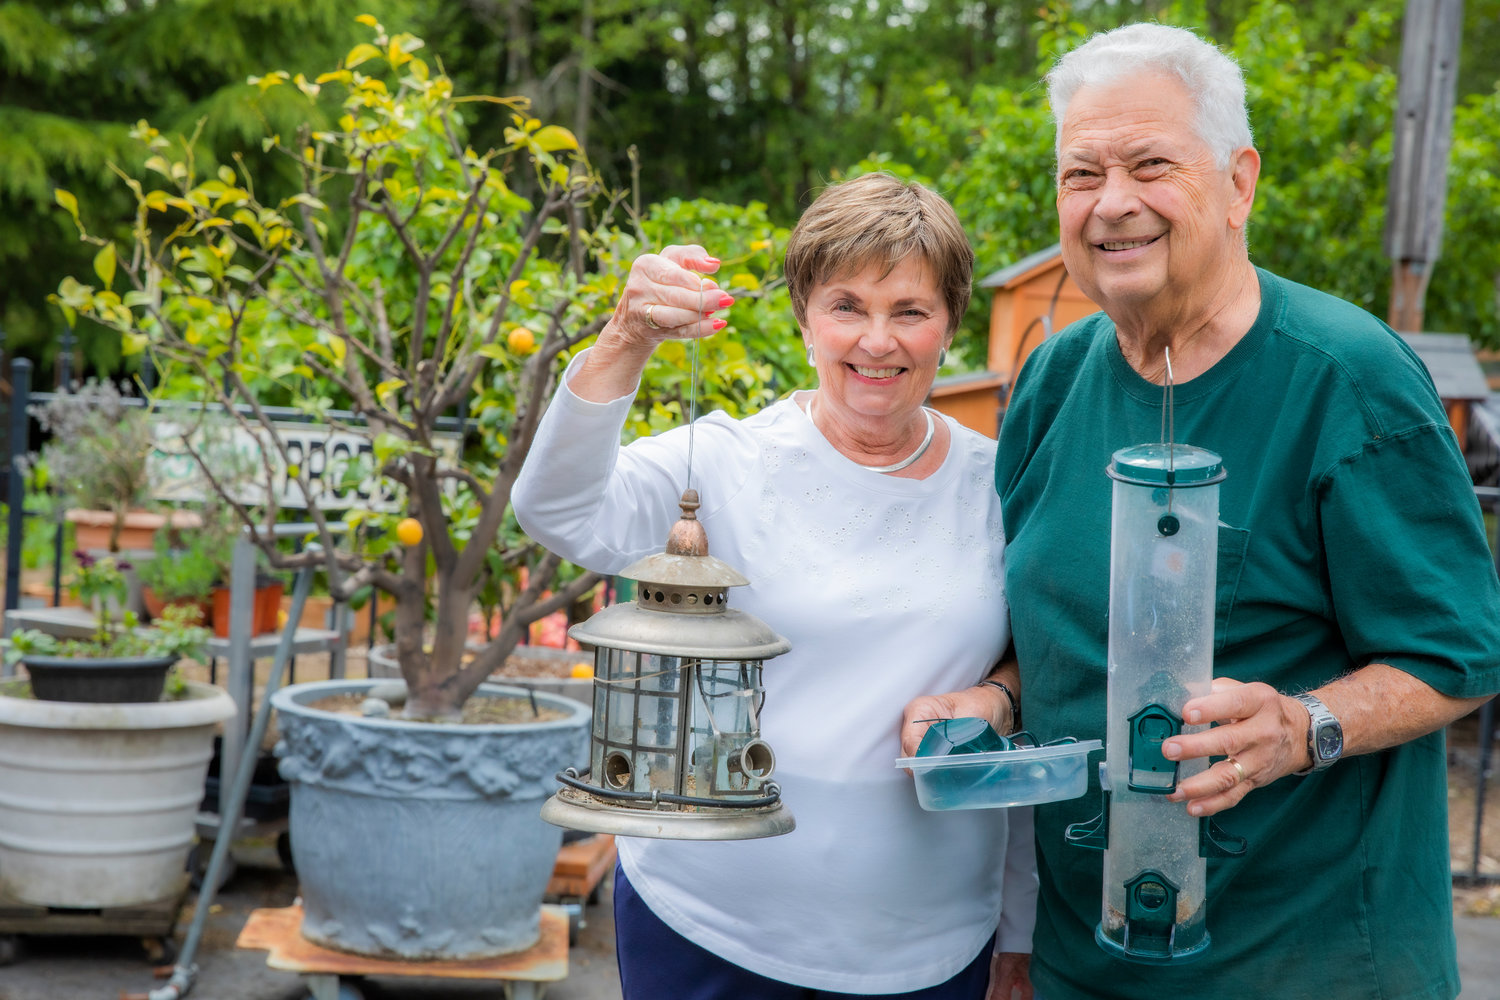 Margie and Russ Trentlage smile while holding up bird feeders they have worked to fix after a bear sunk teeth and claws into feeders for the food inside.